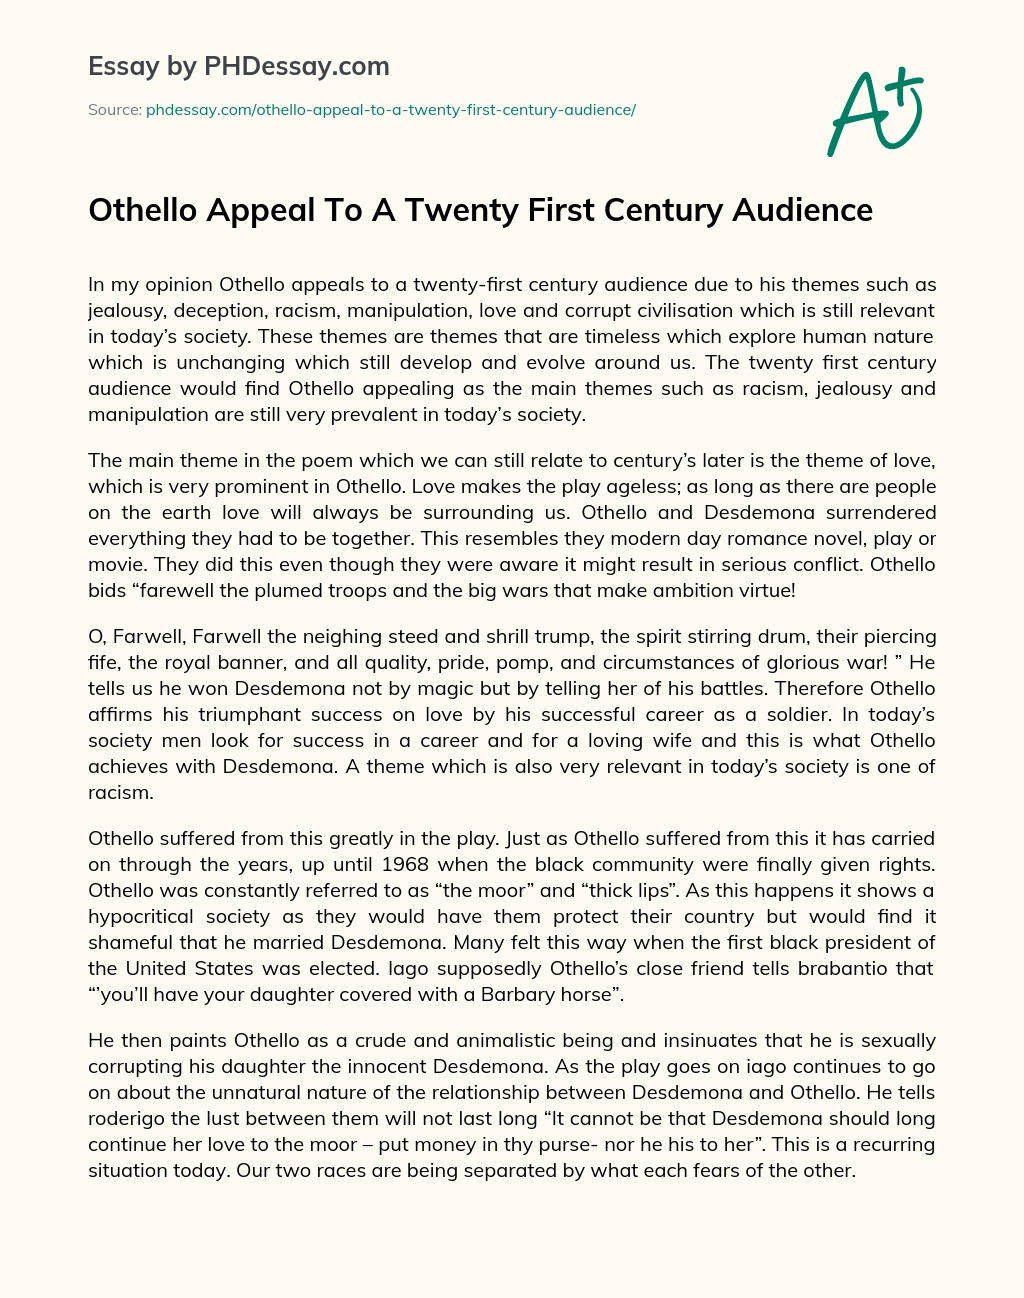 Othello Appeal To A Twenty First Century Audience essay